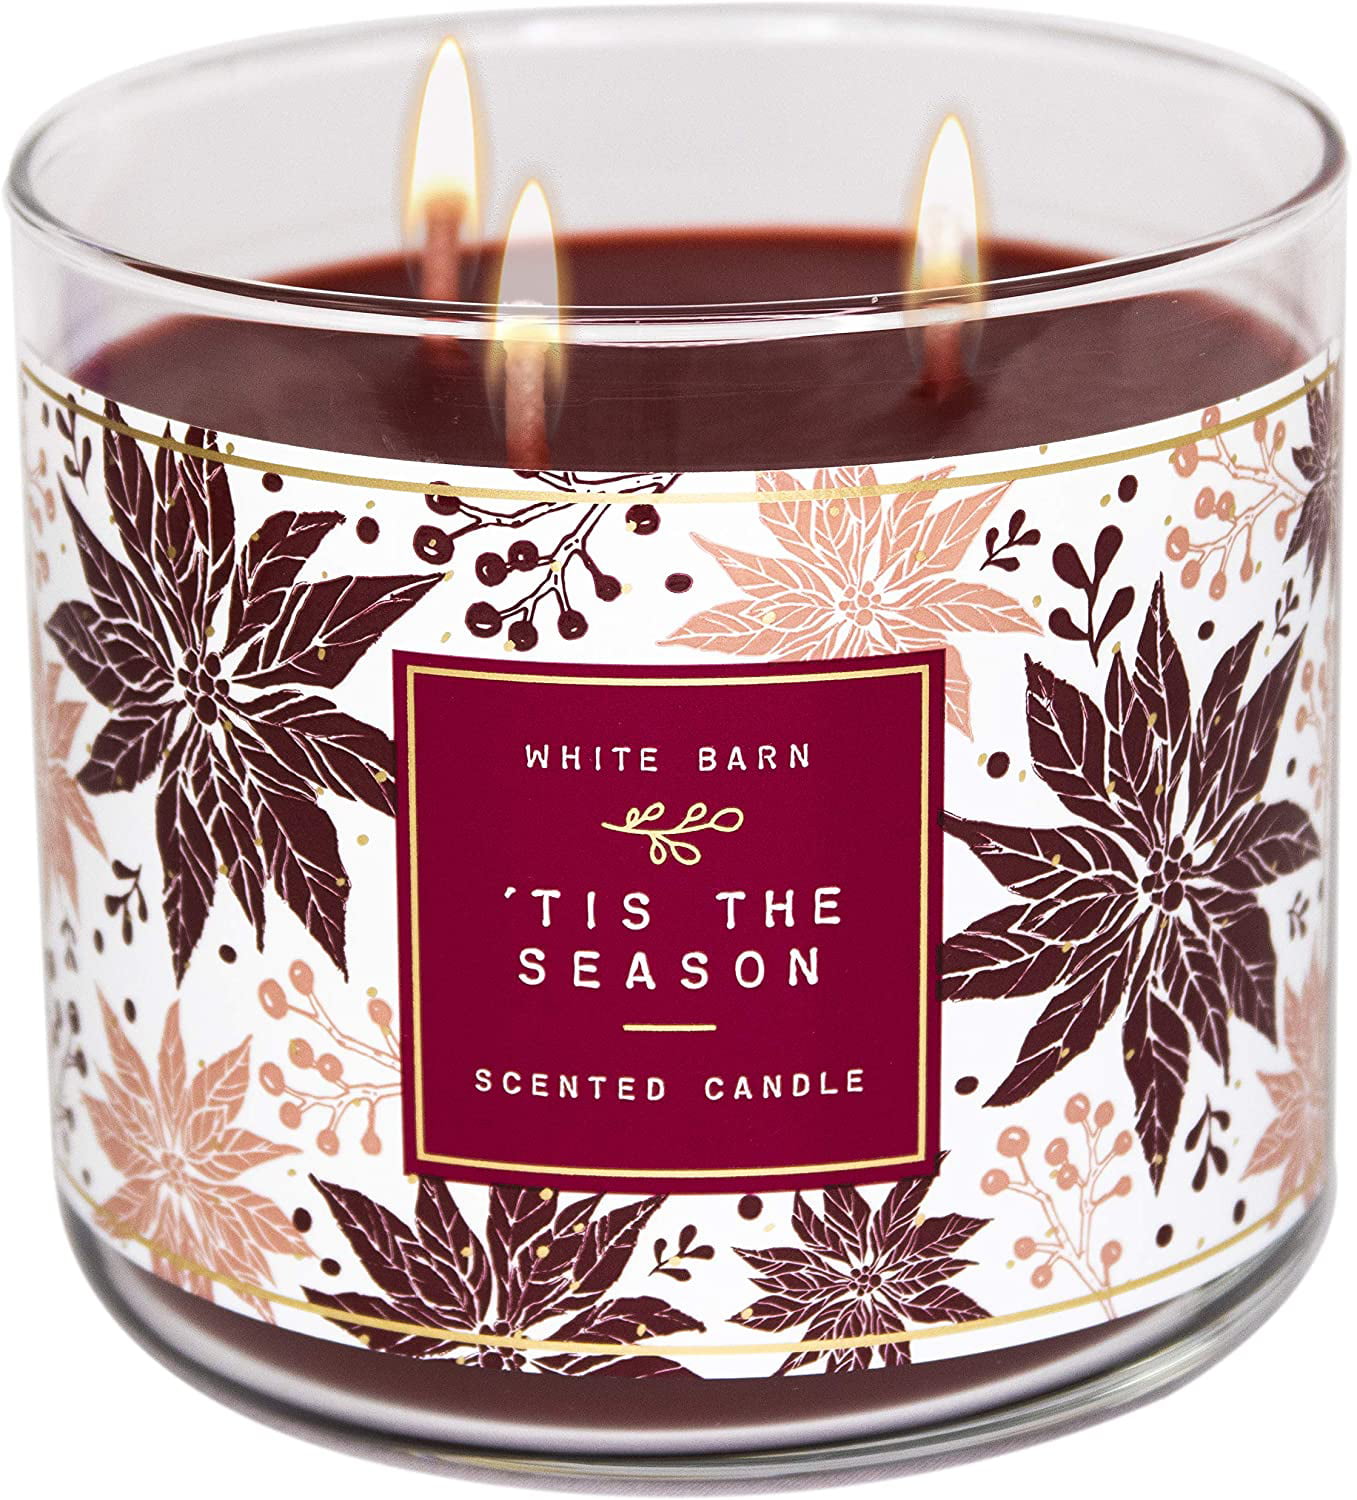 2 Winter Rose Scented Candle Bath & Body Works 14.5 Oz